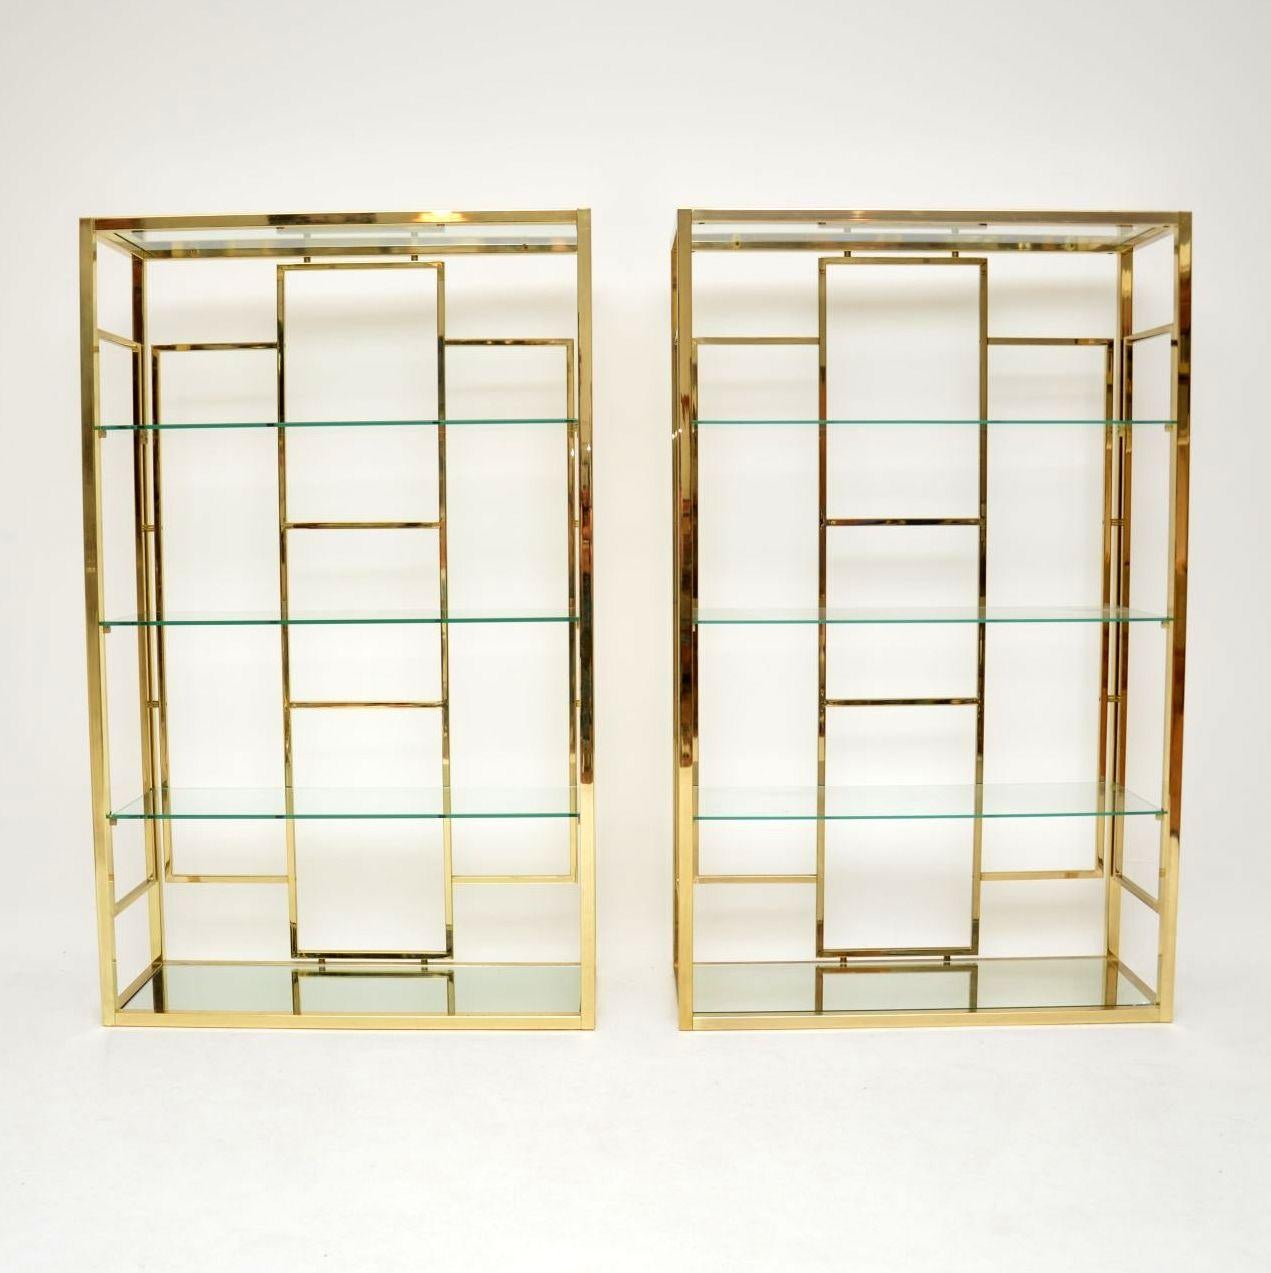 A beautiful and extremely well made pair of vintage brass display cabinets / bookcases, these were made in Italy during the 1970s. They are in superb condition for their age, the brass frames are clean, sturdy and sound, with only some extremely